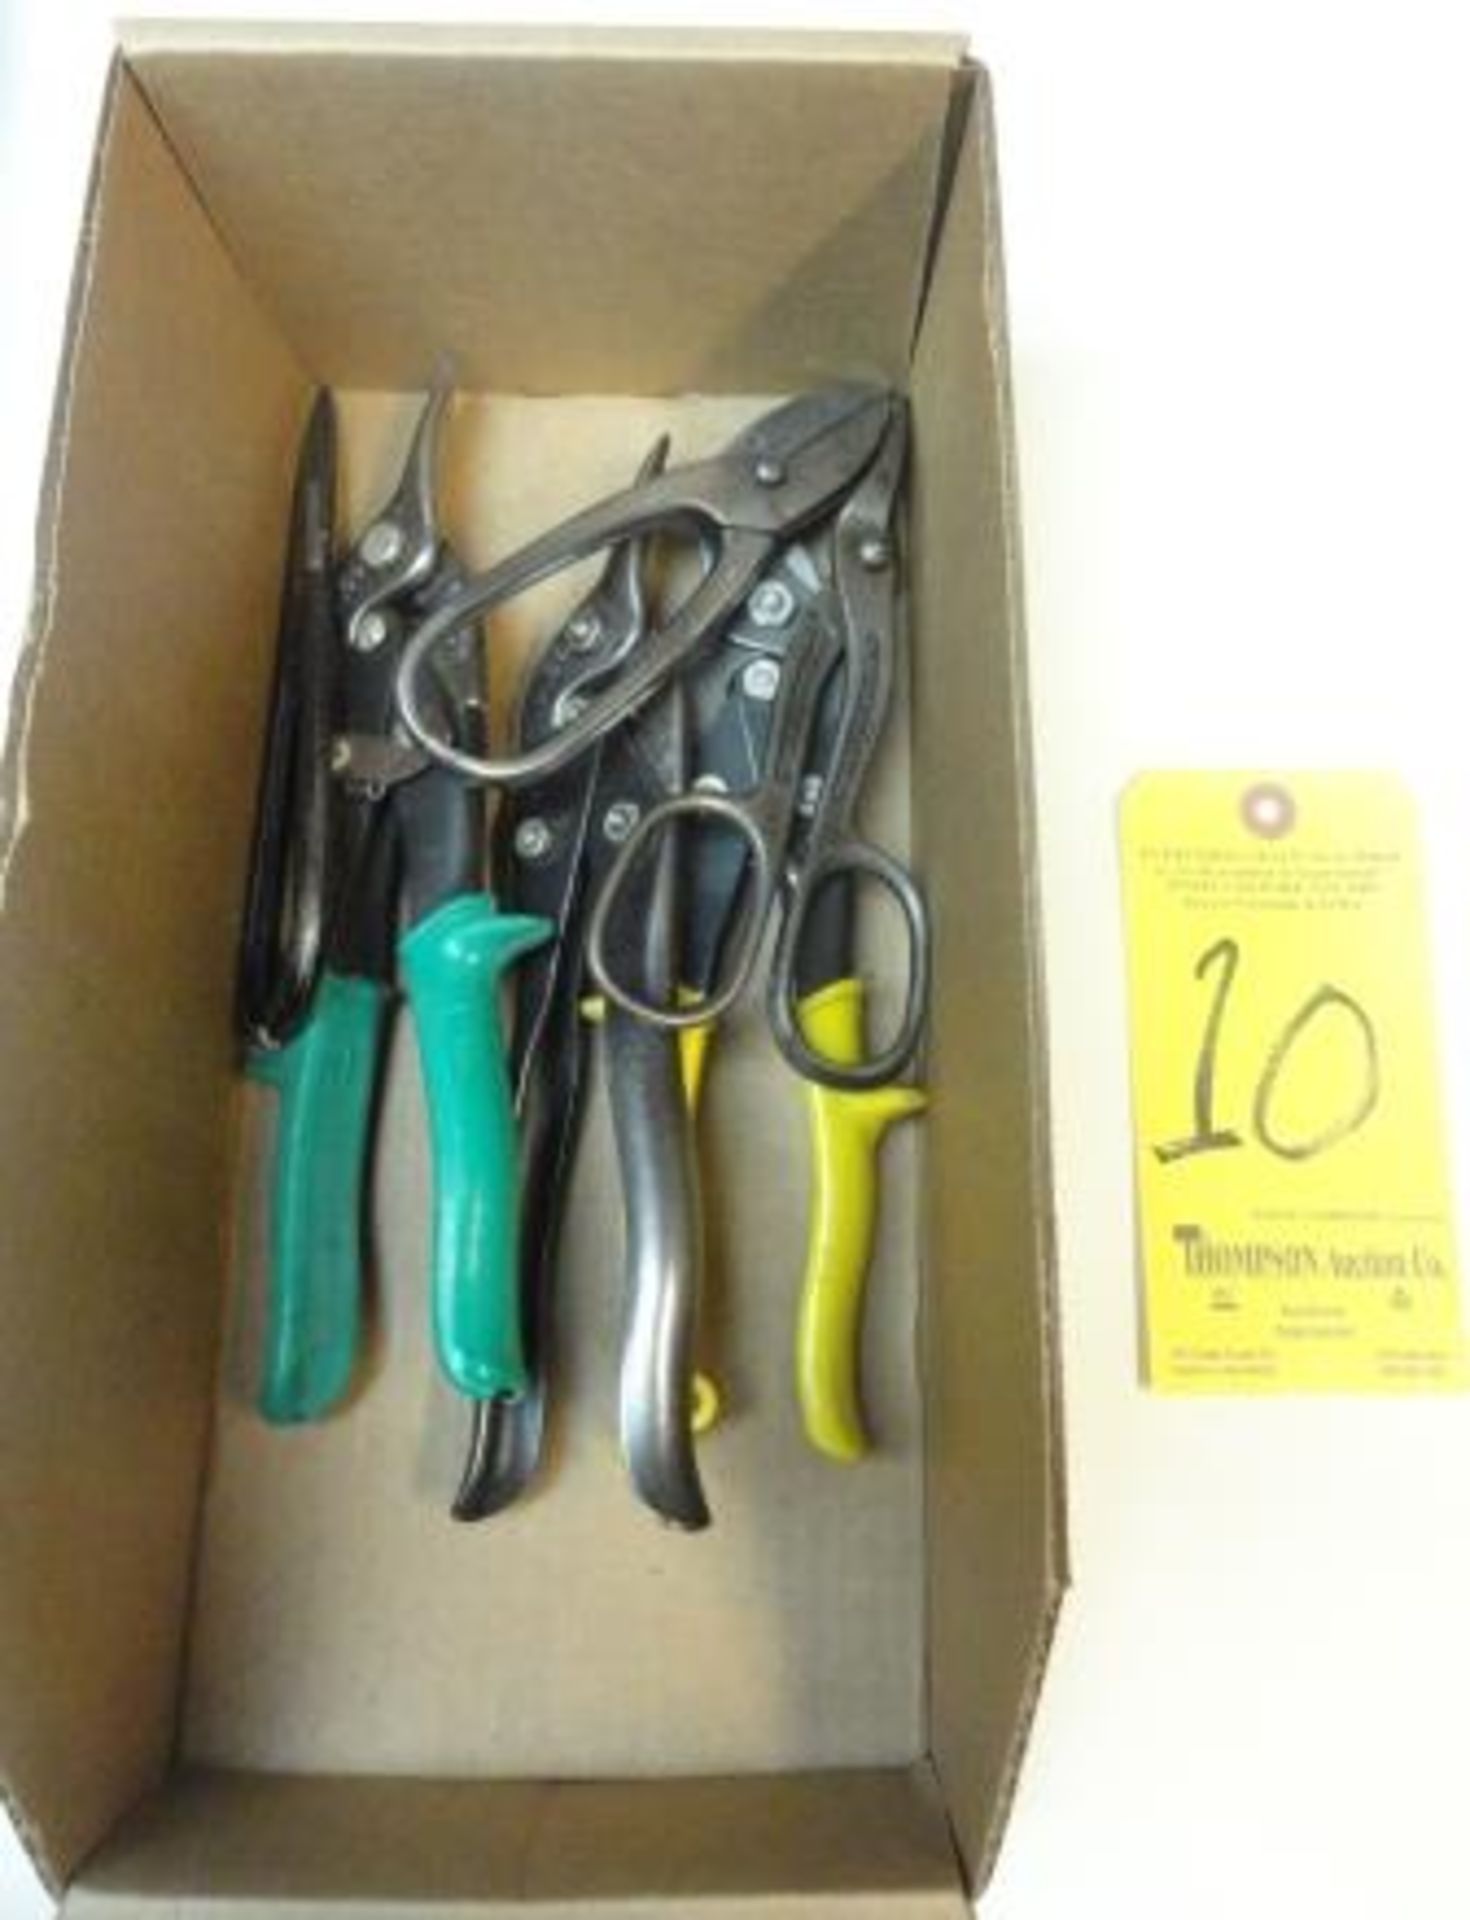 Lot, Shears and Scissors